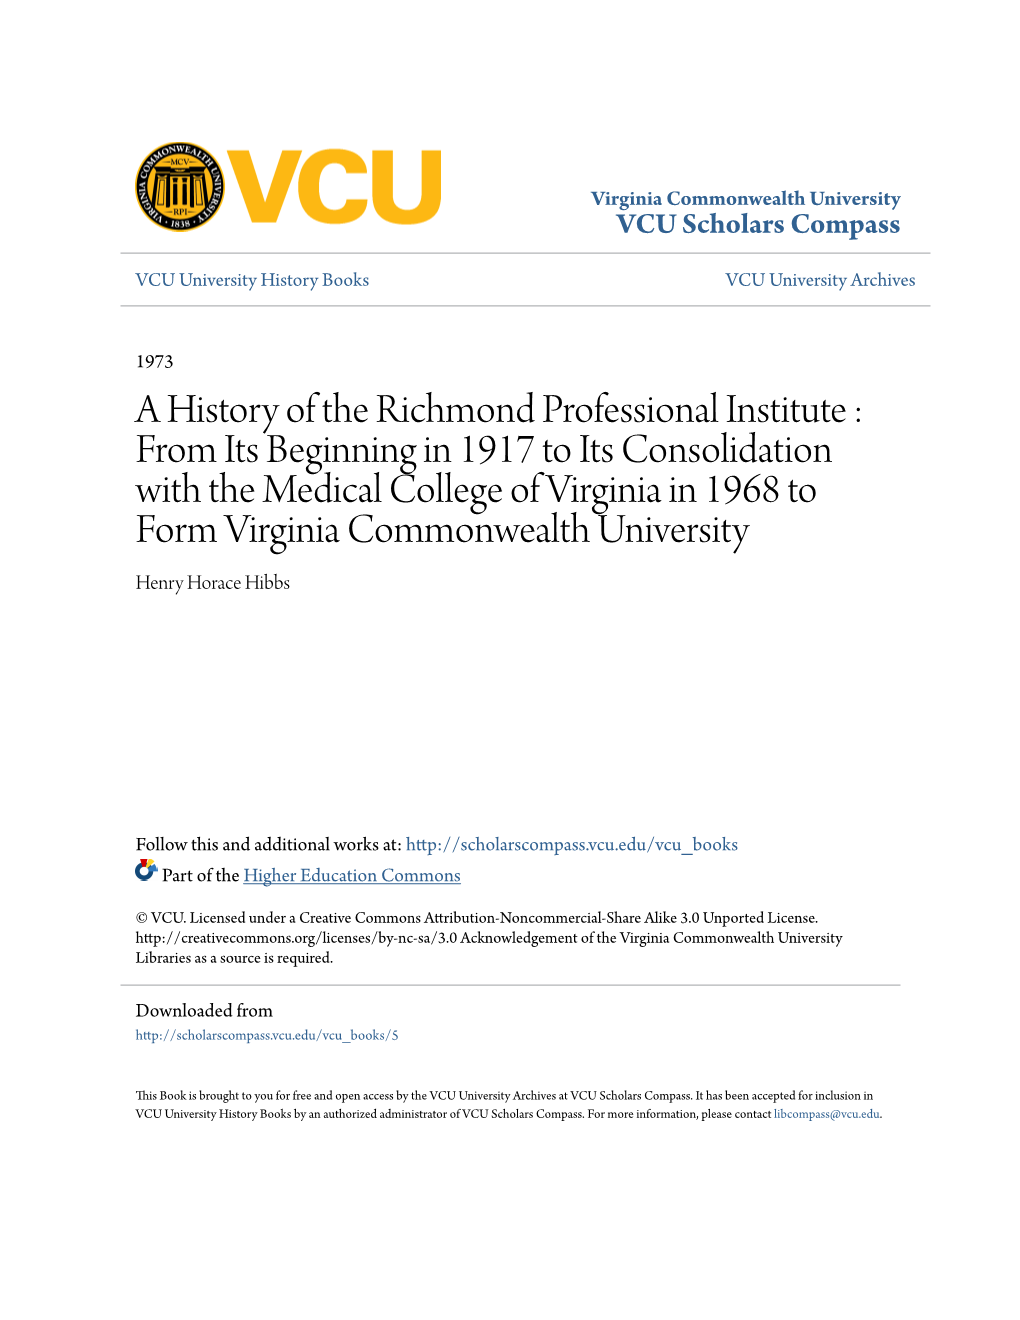 A History of the Richmond Professional Institute : from Its